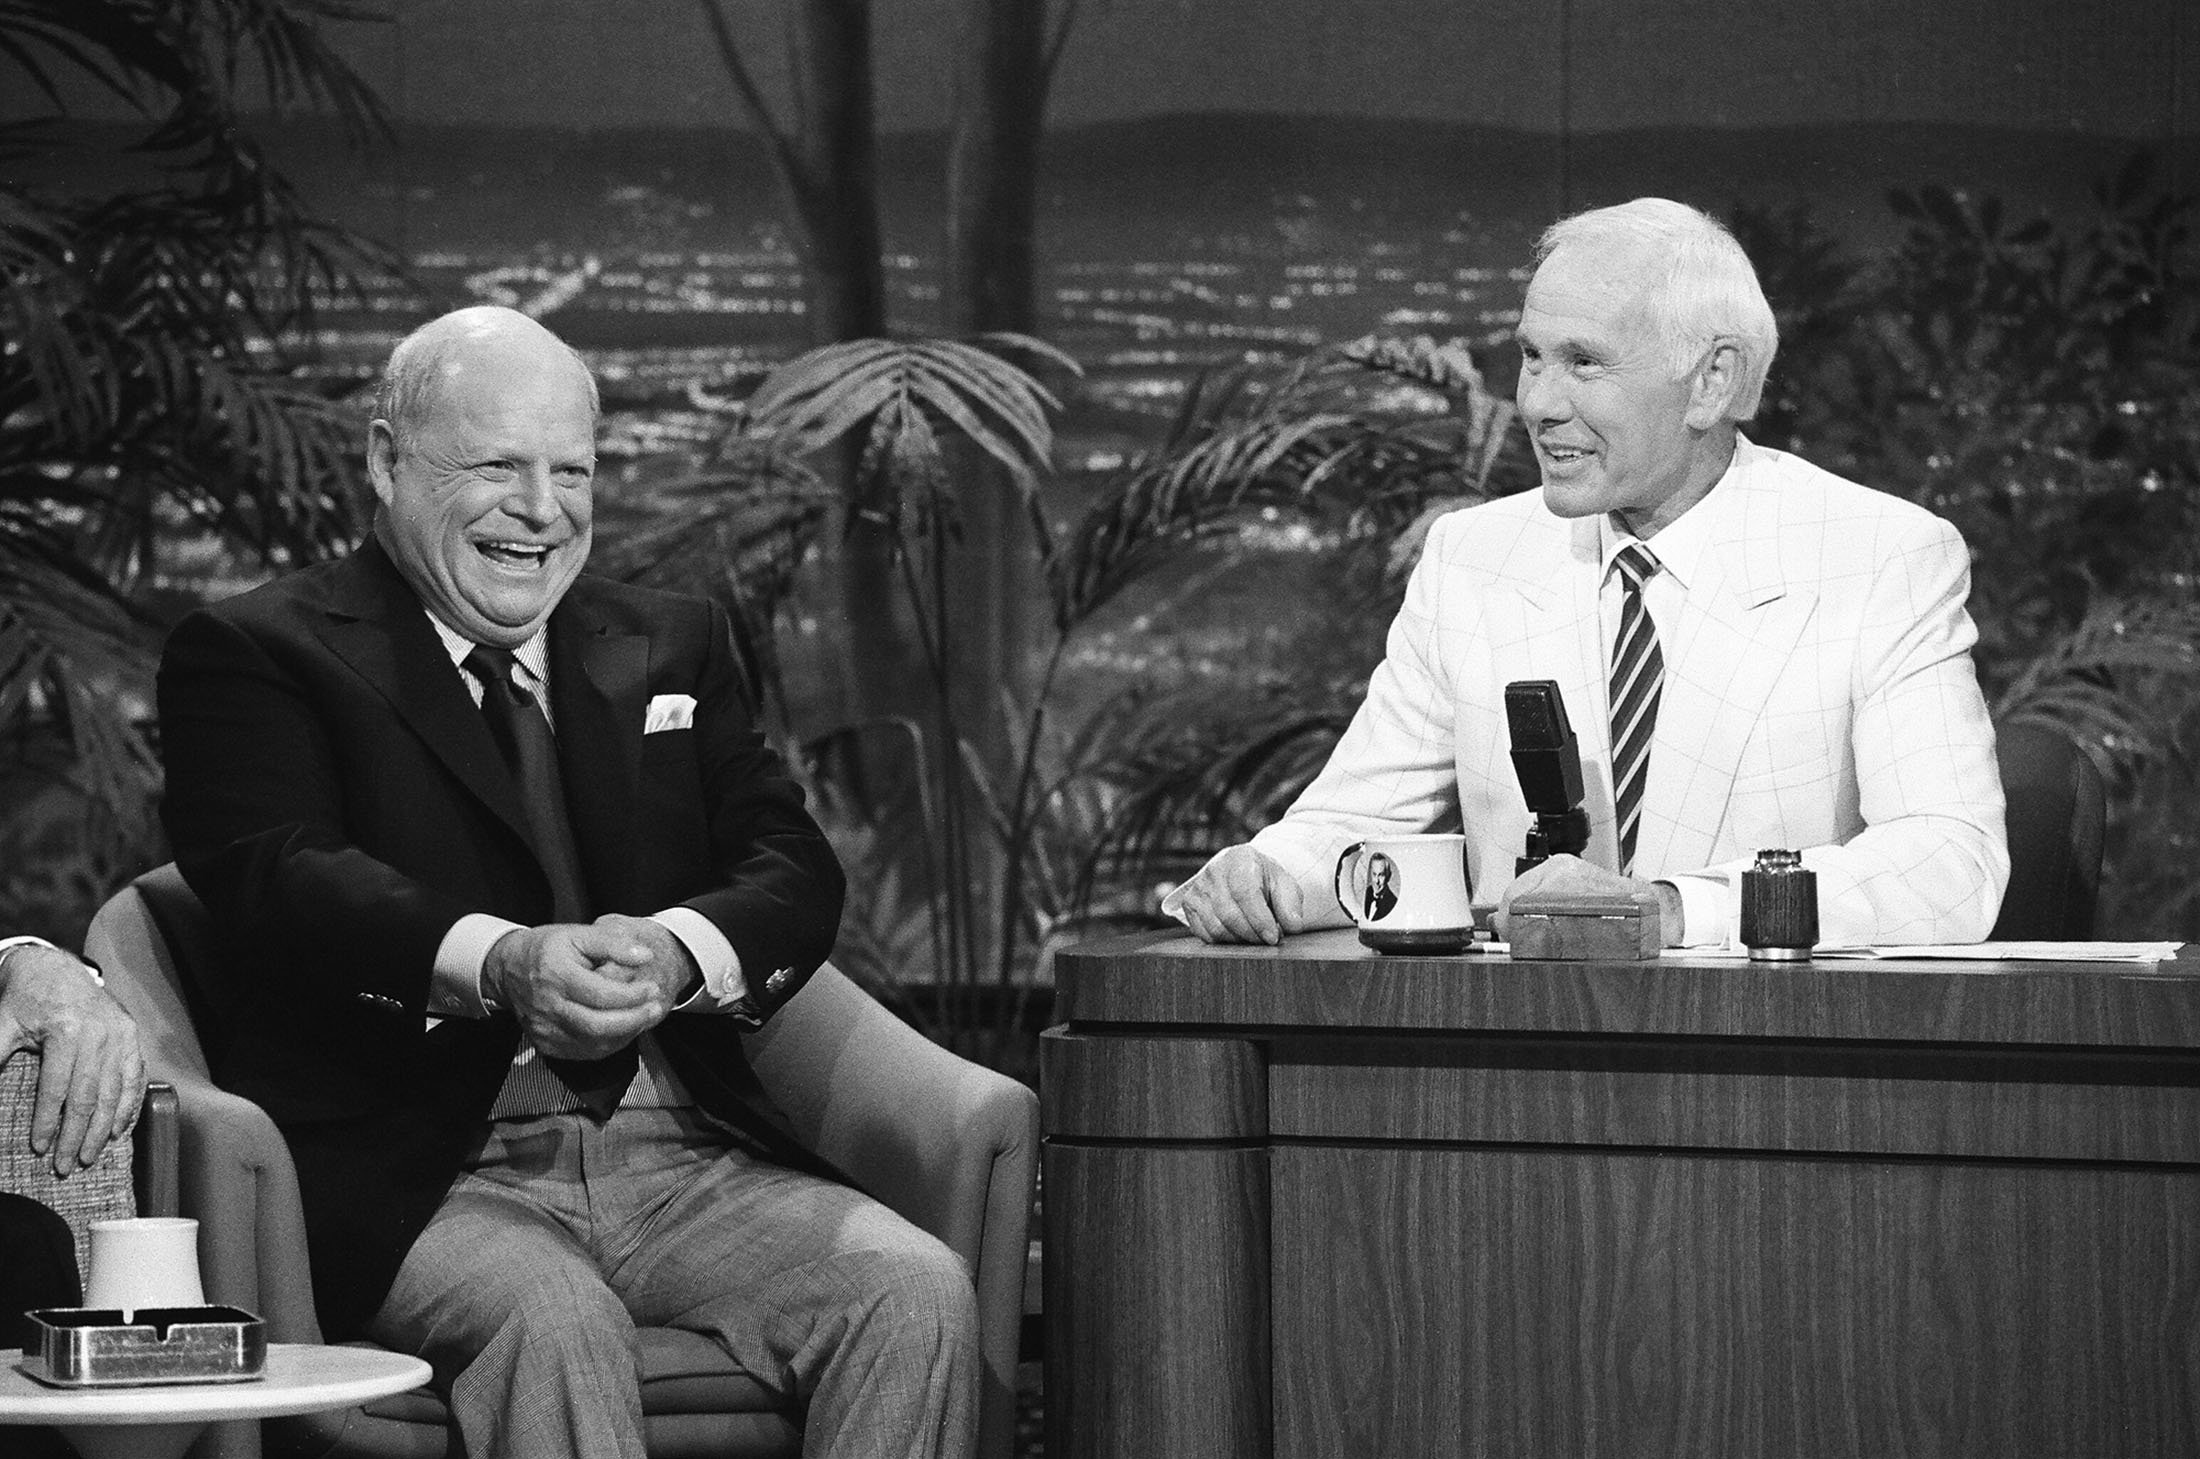 Comedian Don Rickles (L) laughs during an interview with host Johnny Carson on 'The Tonight Show Starring Johnny Carson,' in New York, U.S., May 31, 1991. (Getty Images)